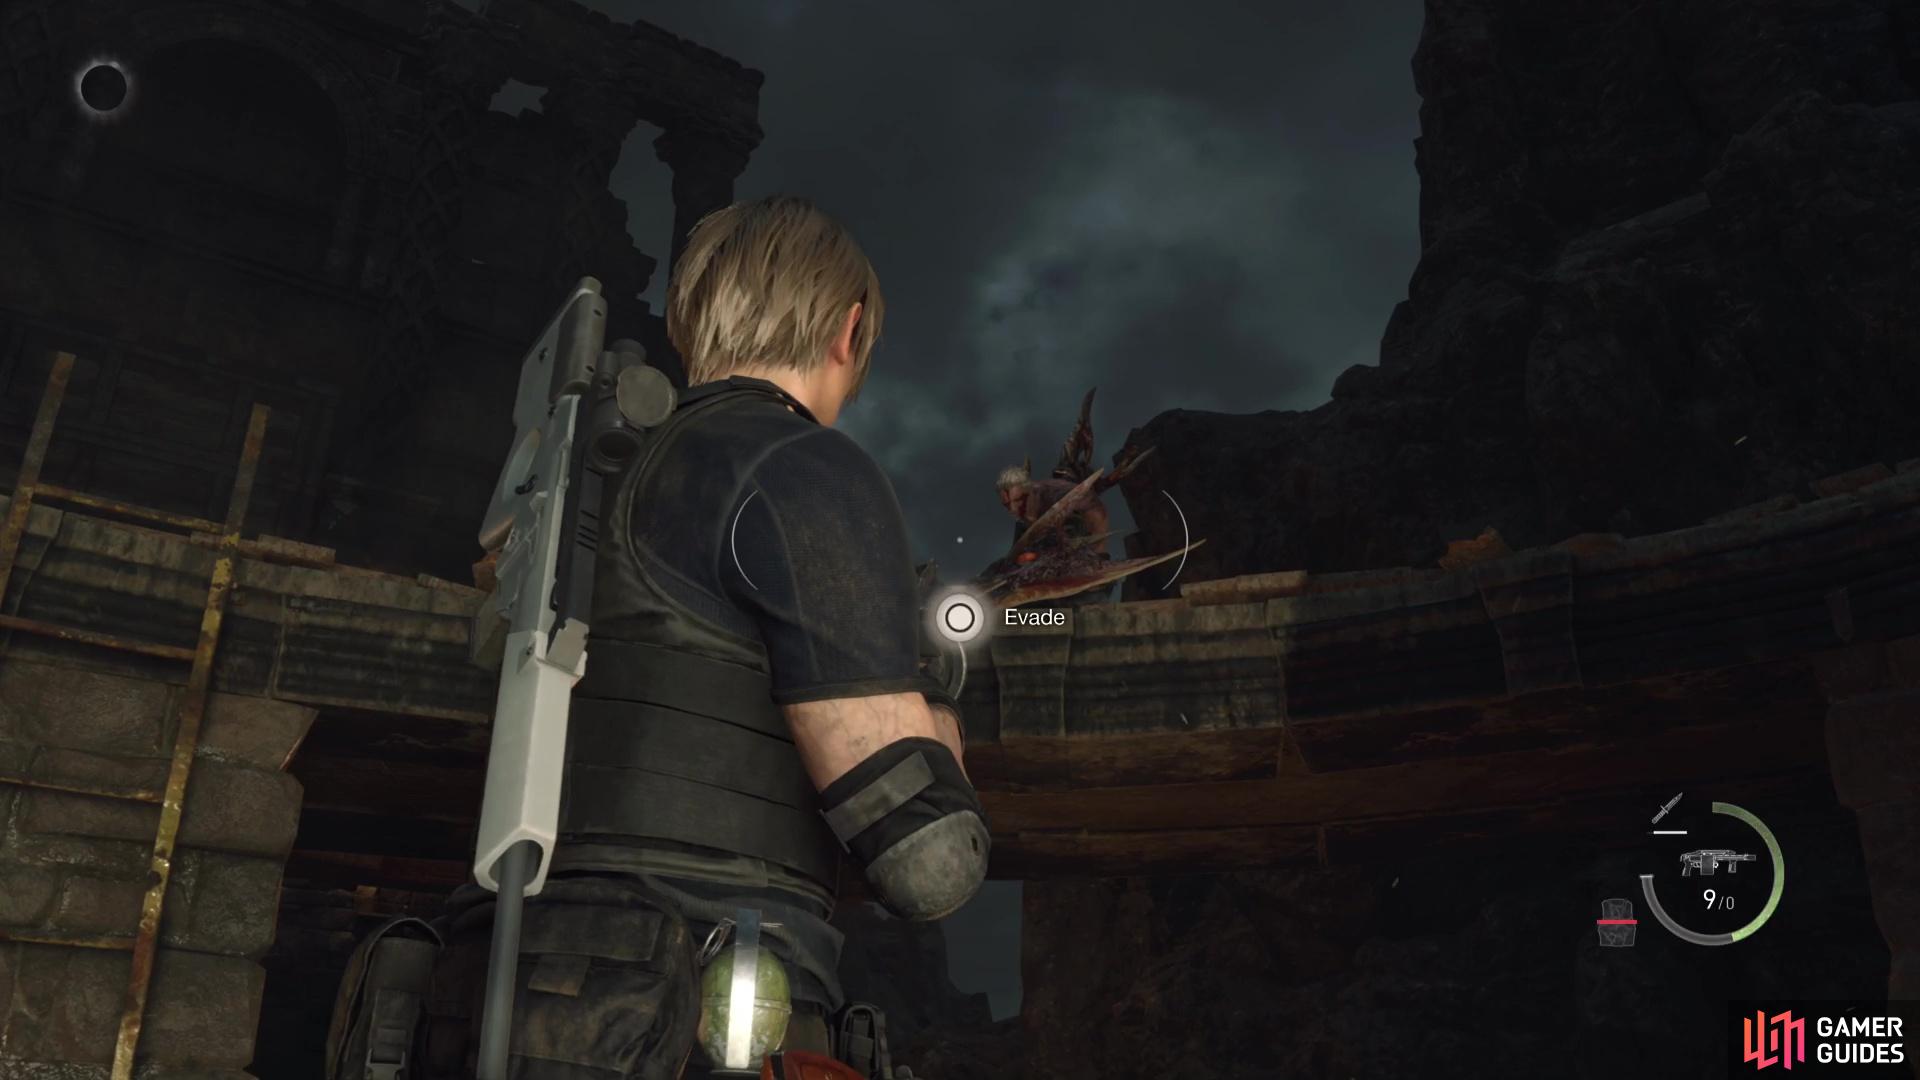 Resident Evil 4: How to escape the Facility, and beat Krauser